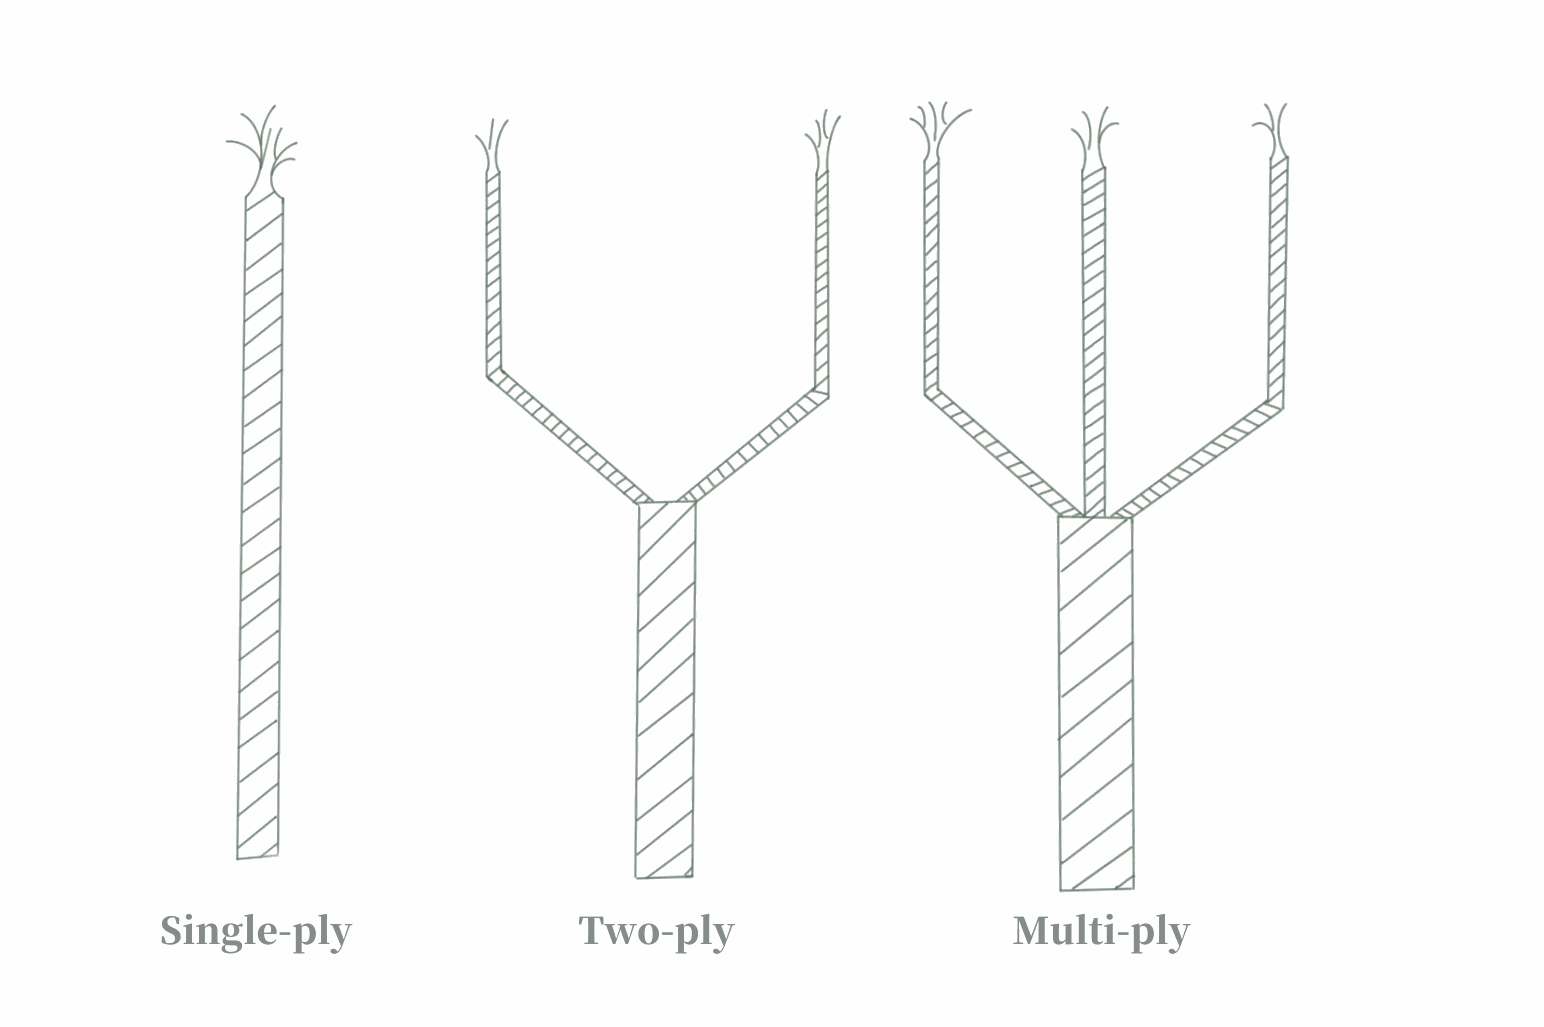 Illustration of Ply Count in Weaving Linens